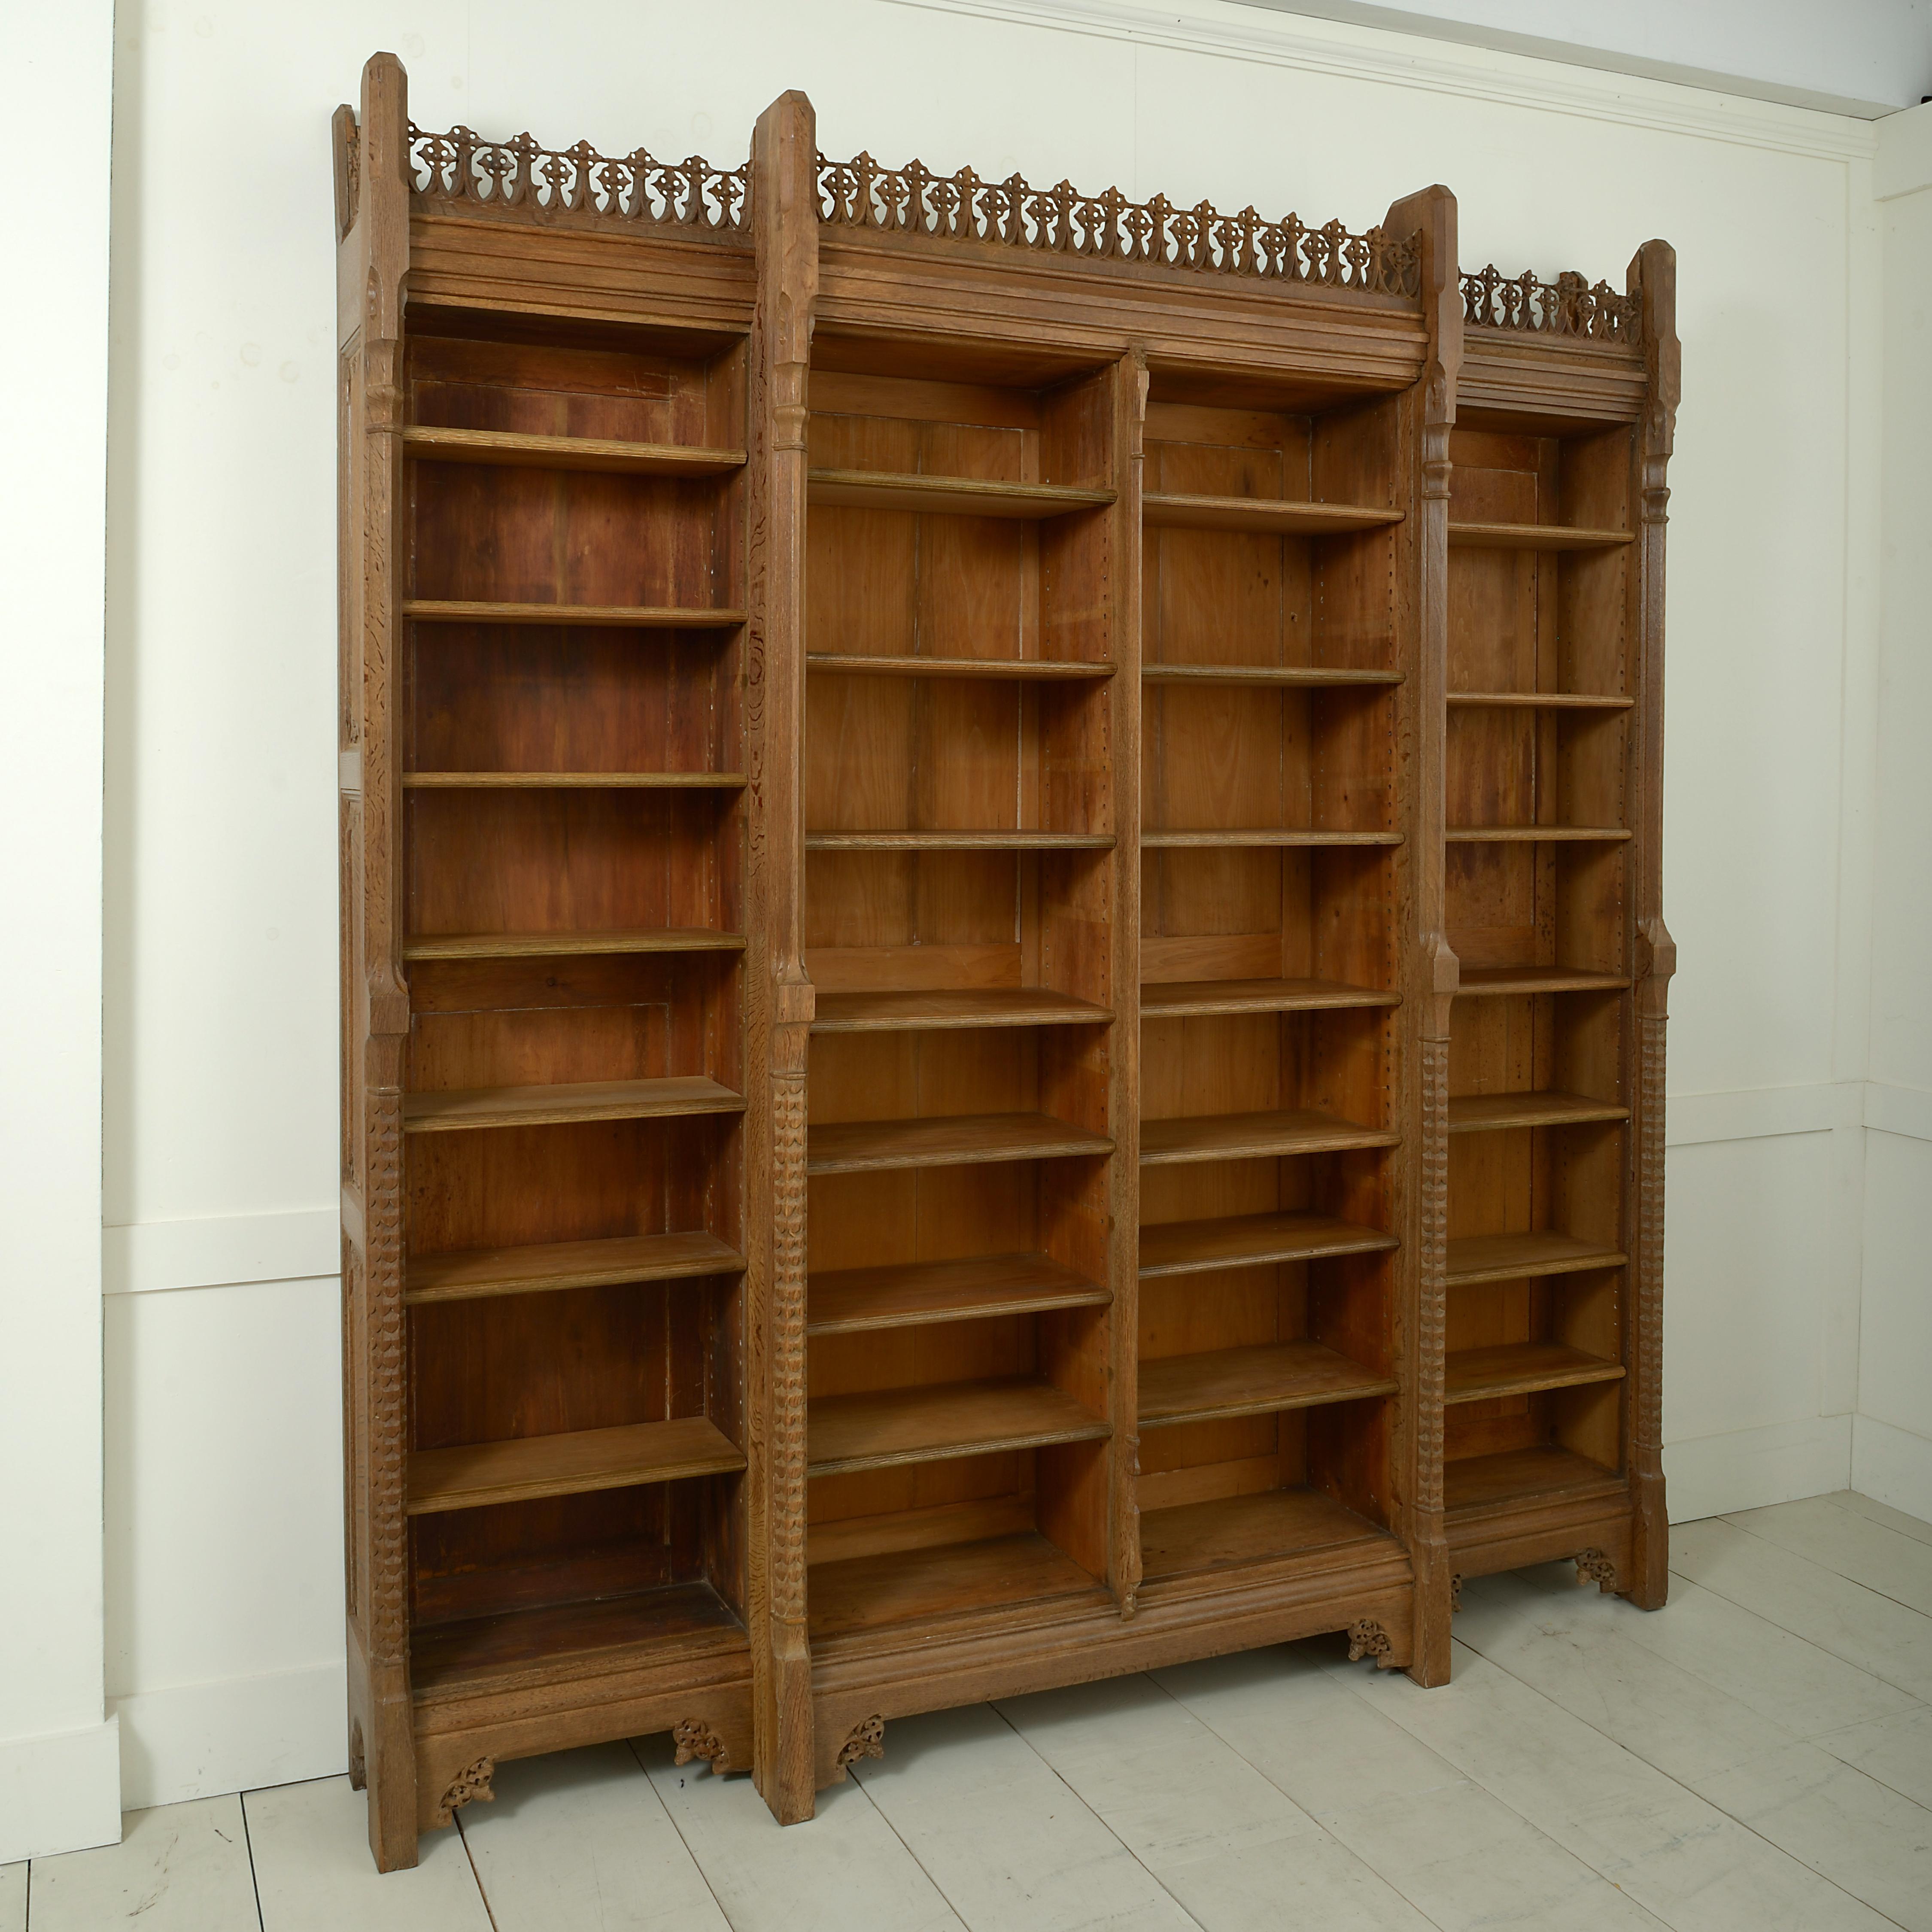 An early Victorian oak breakfront open bookcase, the design attributed to A.W.N Pugin and the manufacture to J.G. Crace, circa 1850.

Literature:
Mark Girouard, The Victorian Country House, 1979, illustrated pl. 156
These tables came from